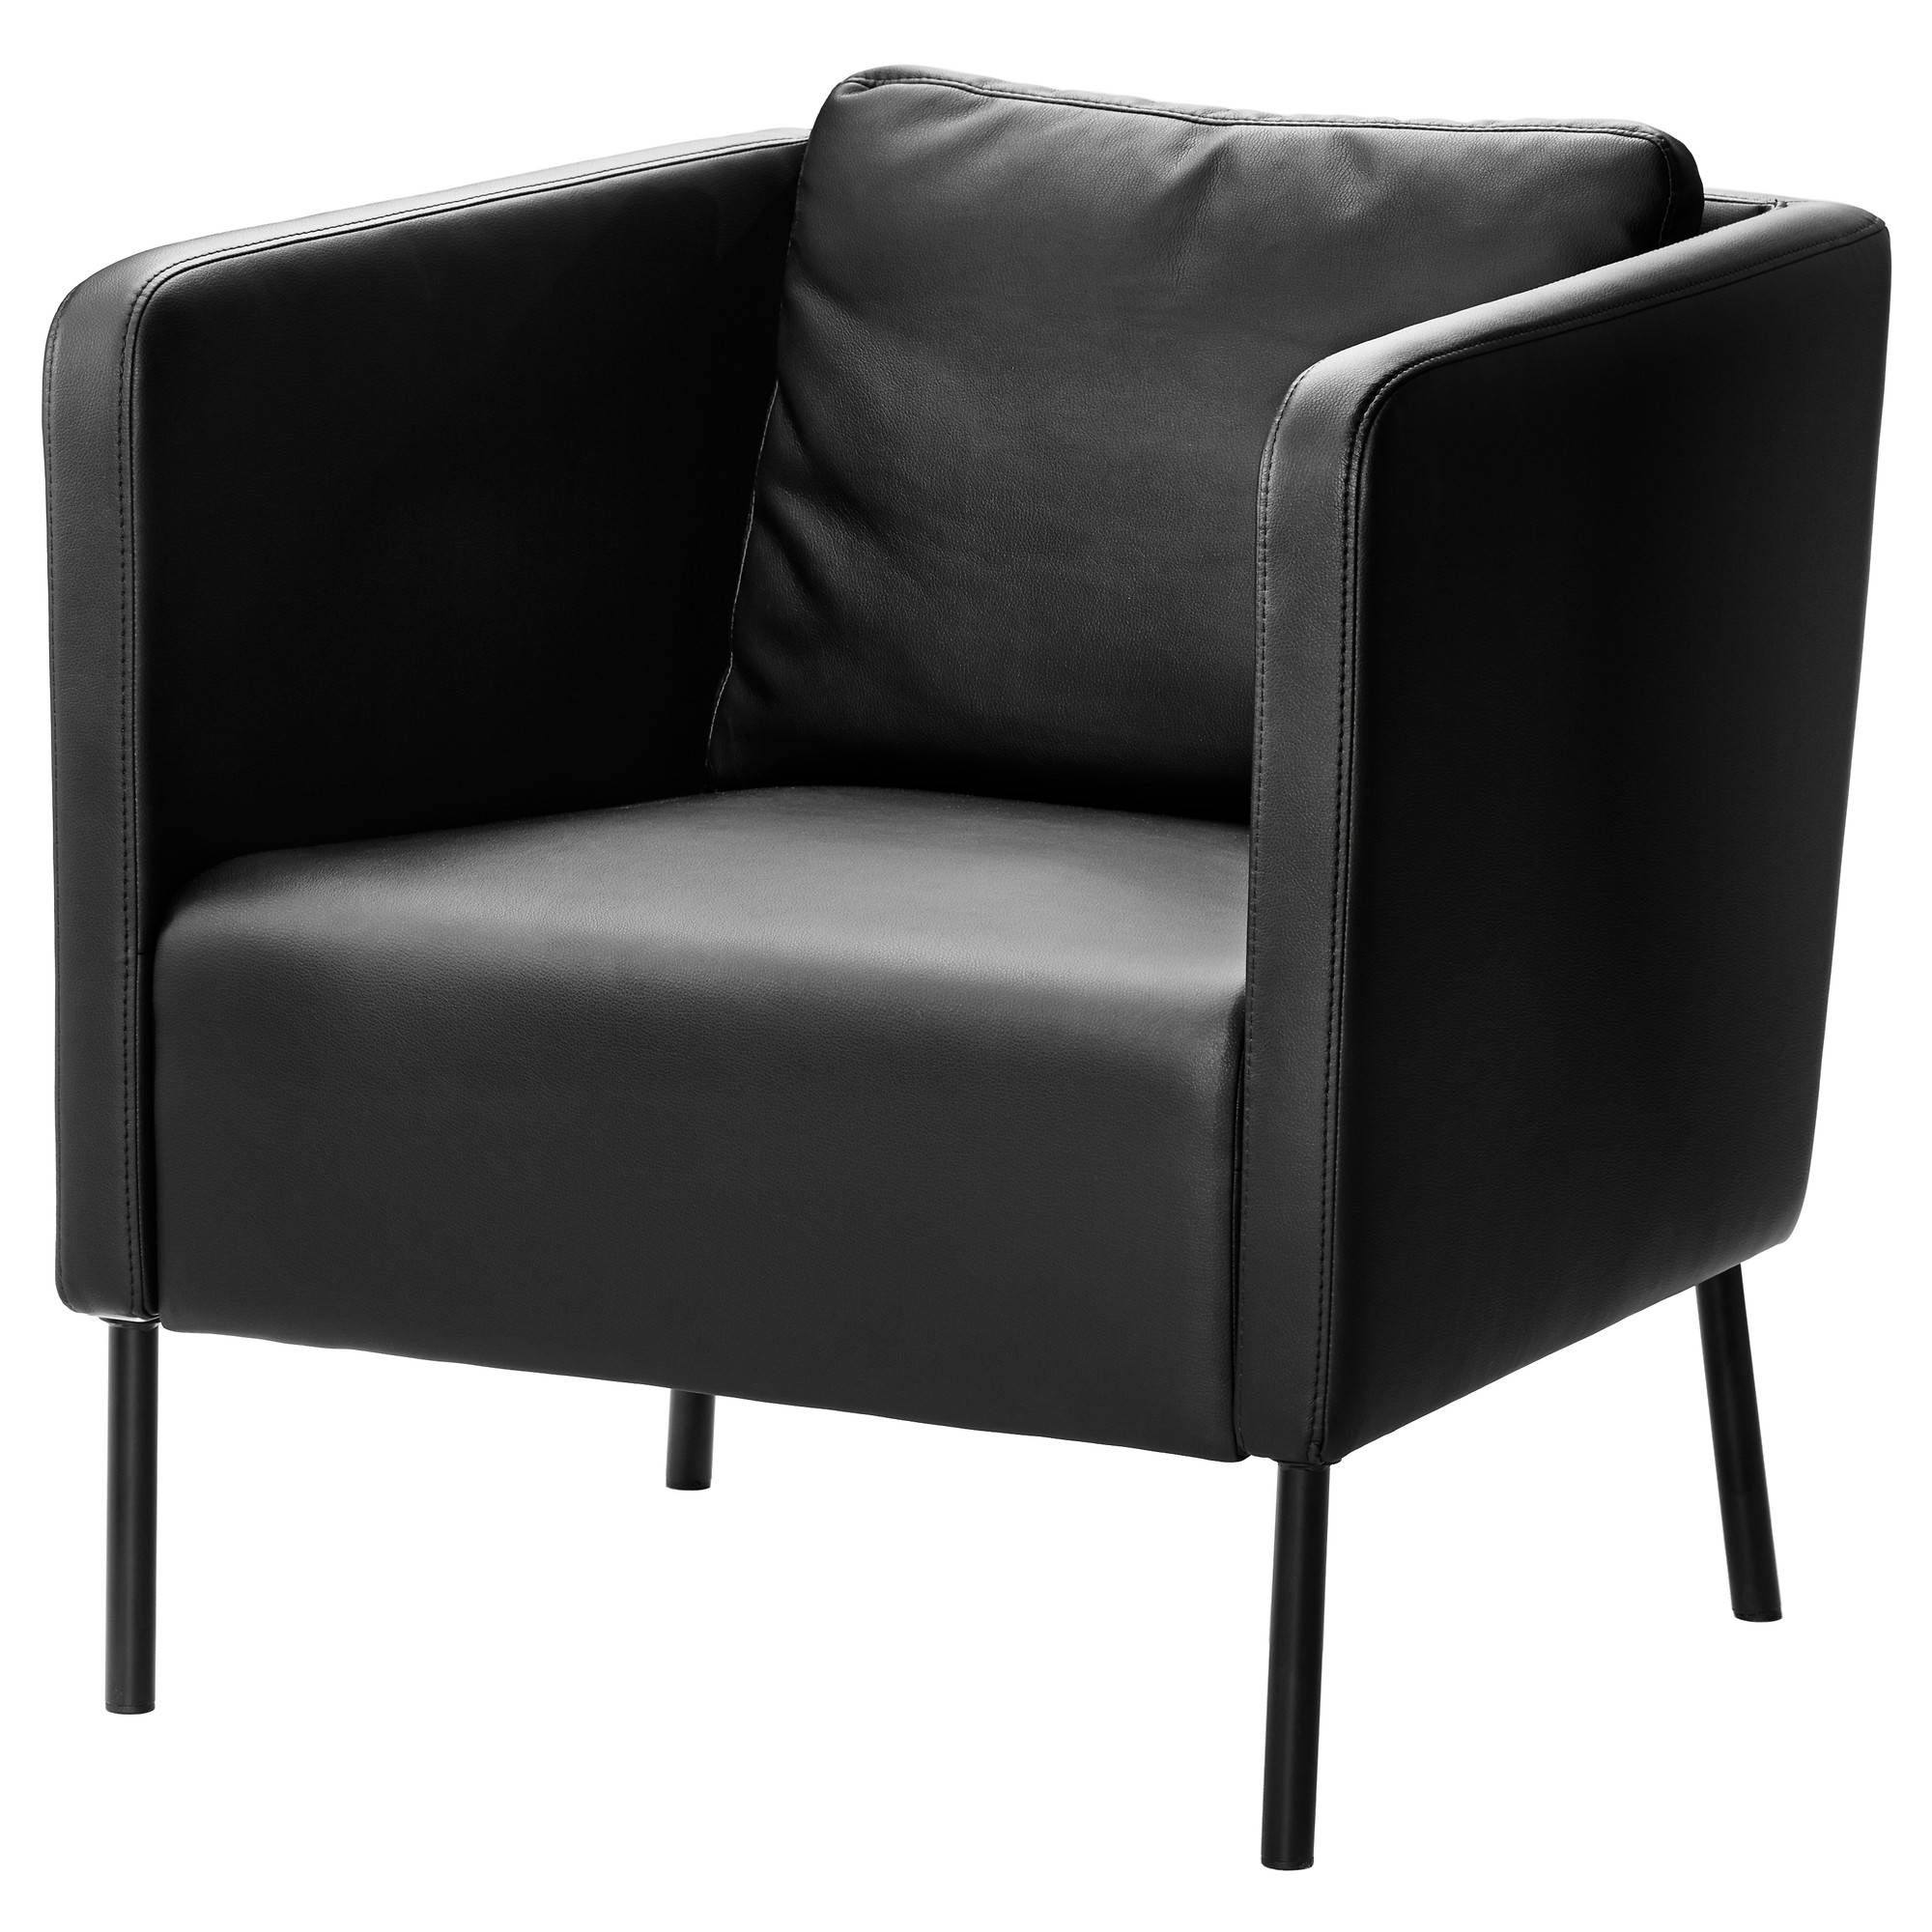 Armchairs & Recliner Chairs | Ikea Intended For Sofa Chairs Ikea (View 8 of 30)